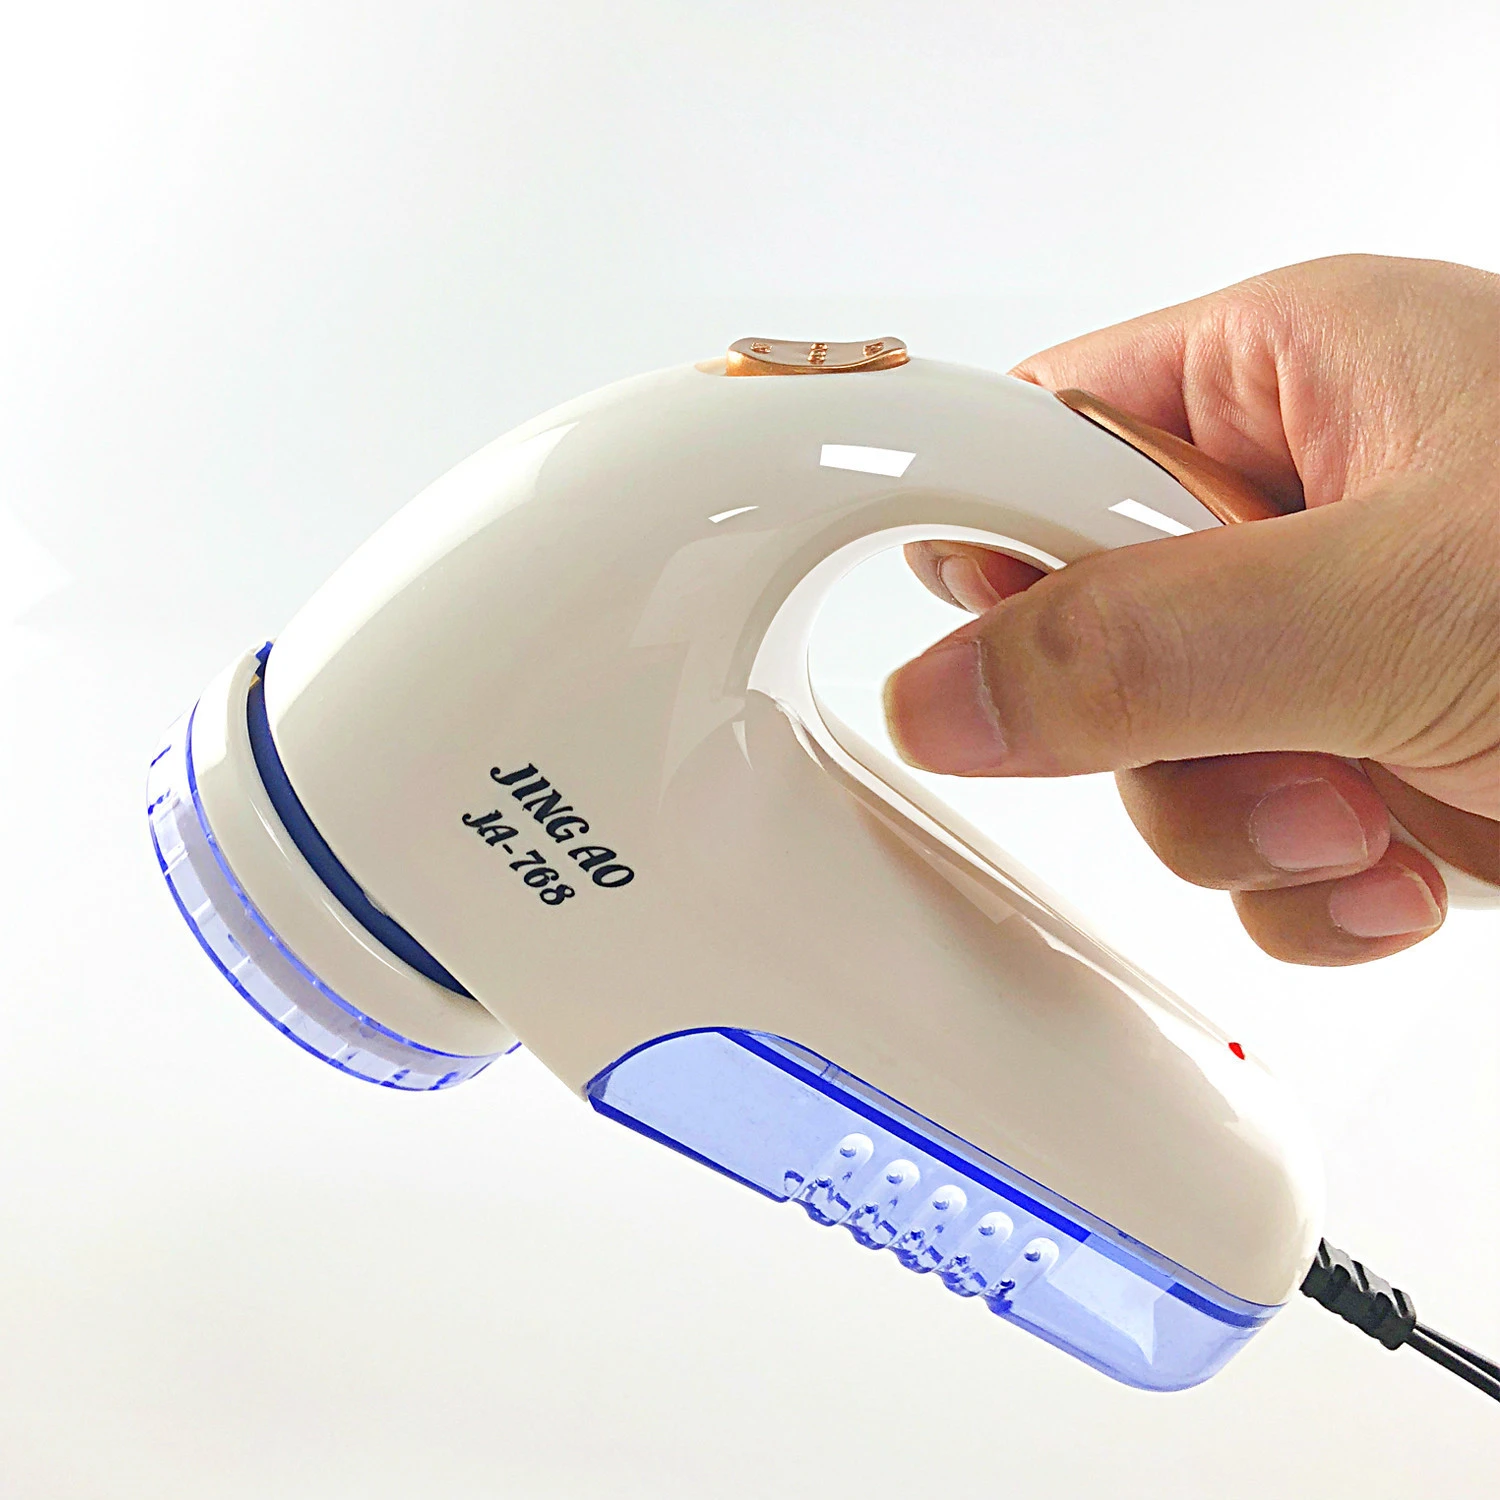 Hot selling products 110V plug-in lint remover sweater coats knit clothes brush lint remover